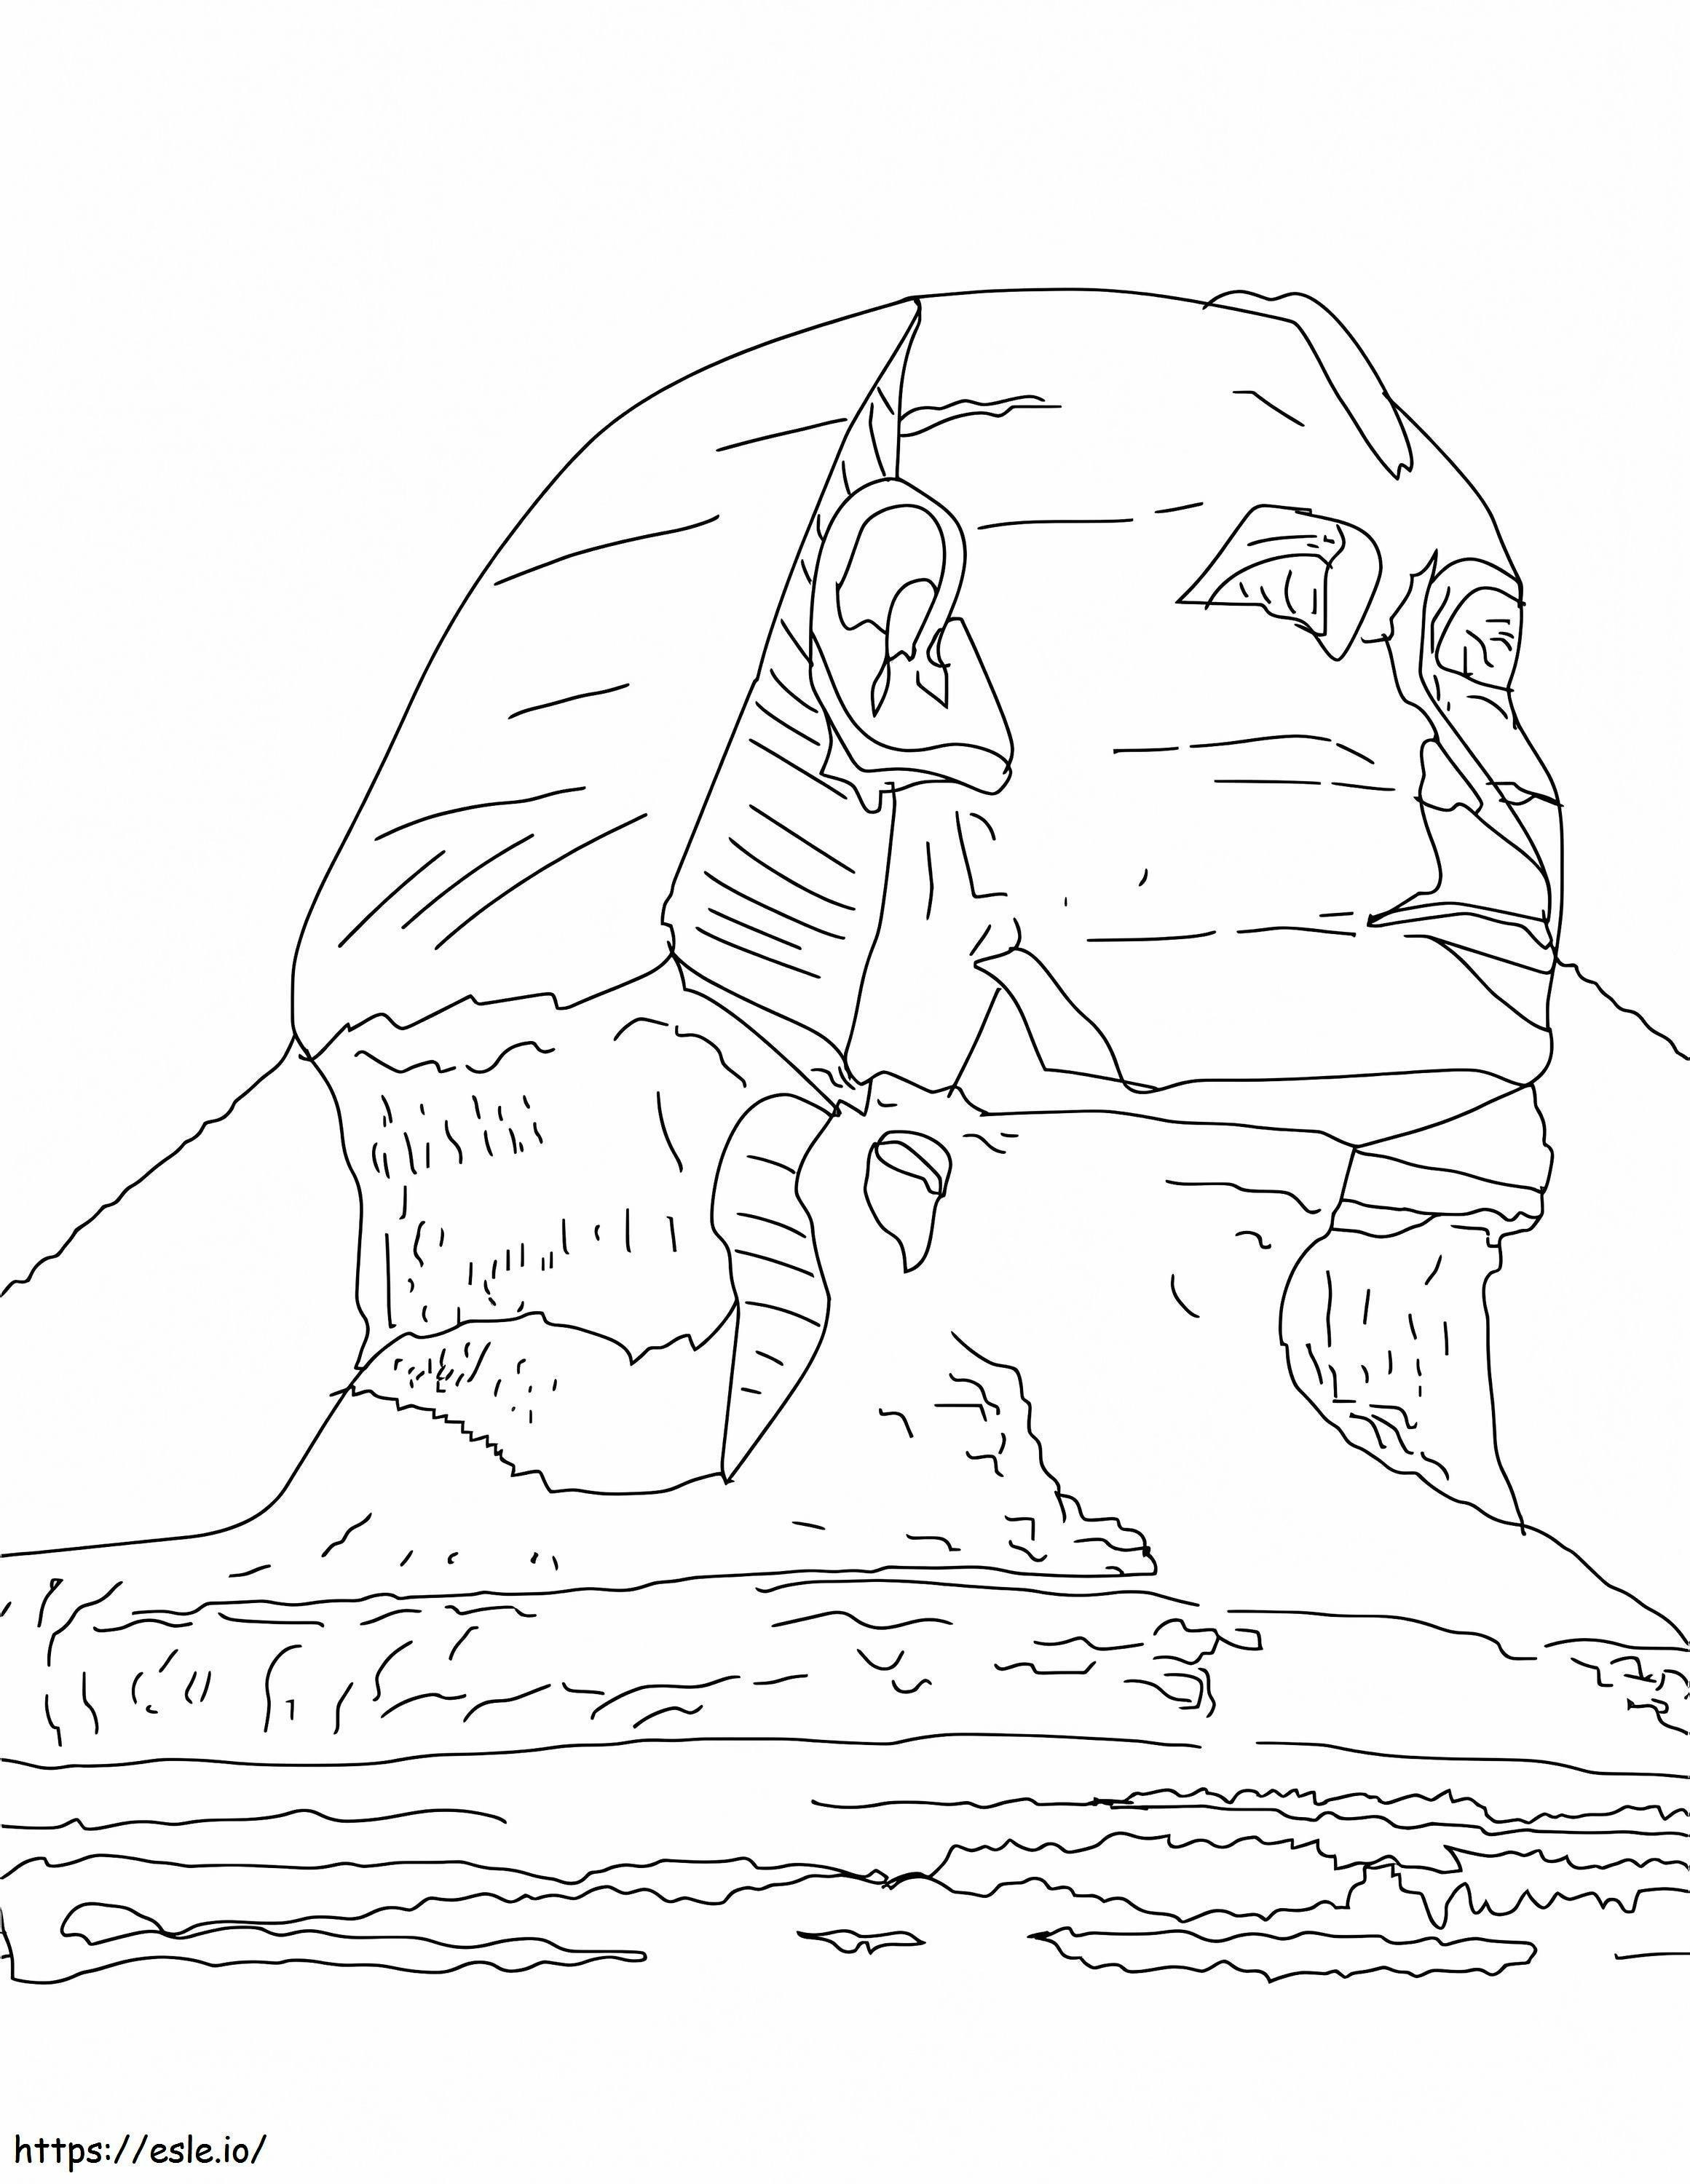 Sphinx Of Giza coloring page